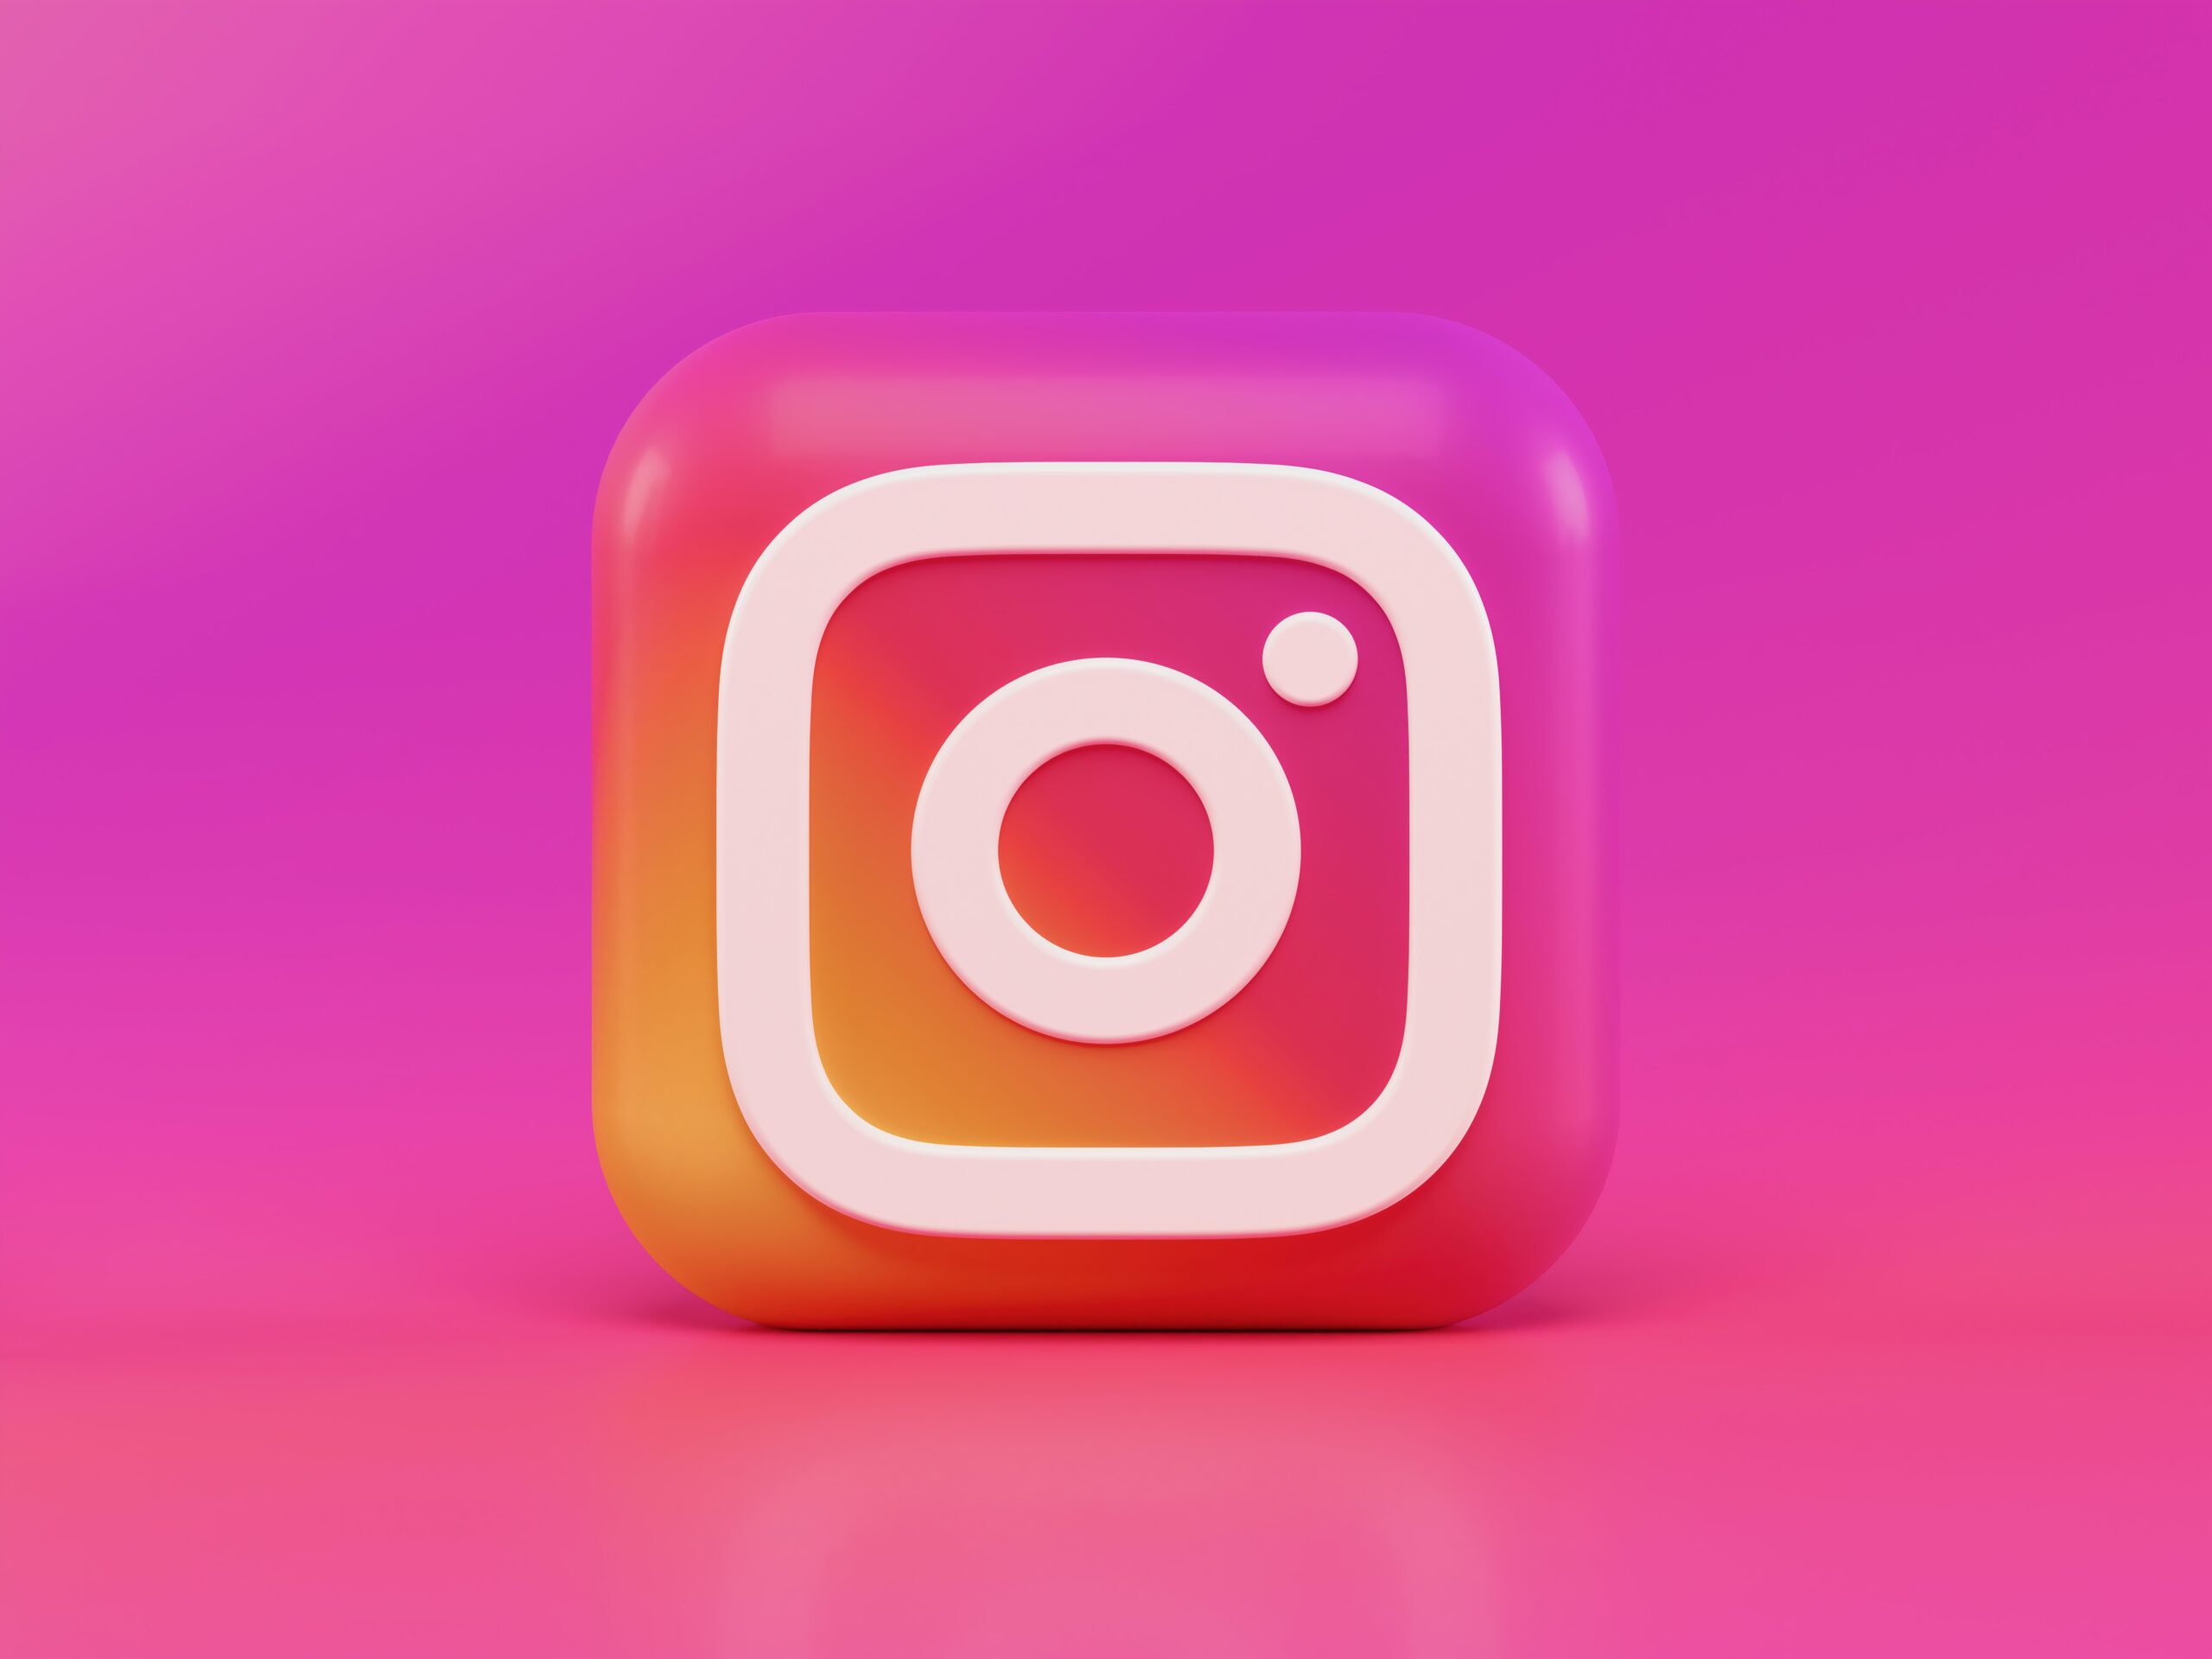 Dominate the Gram: The Secrets Behind Successful Instagram Product Marketing